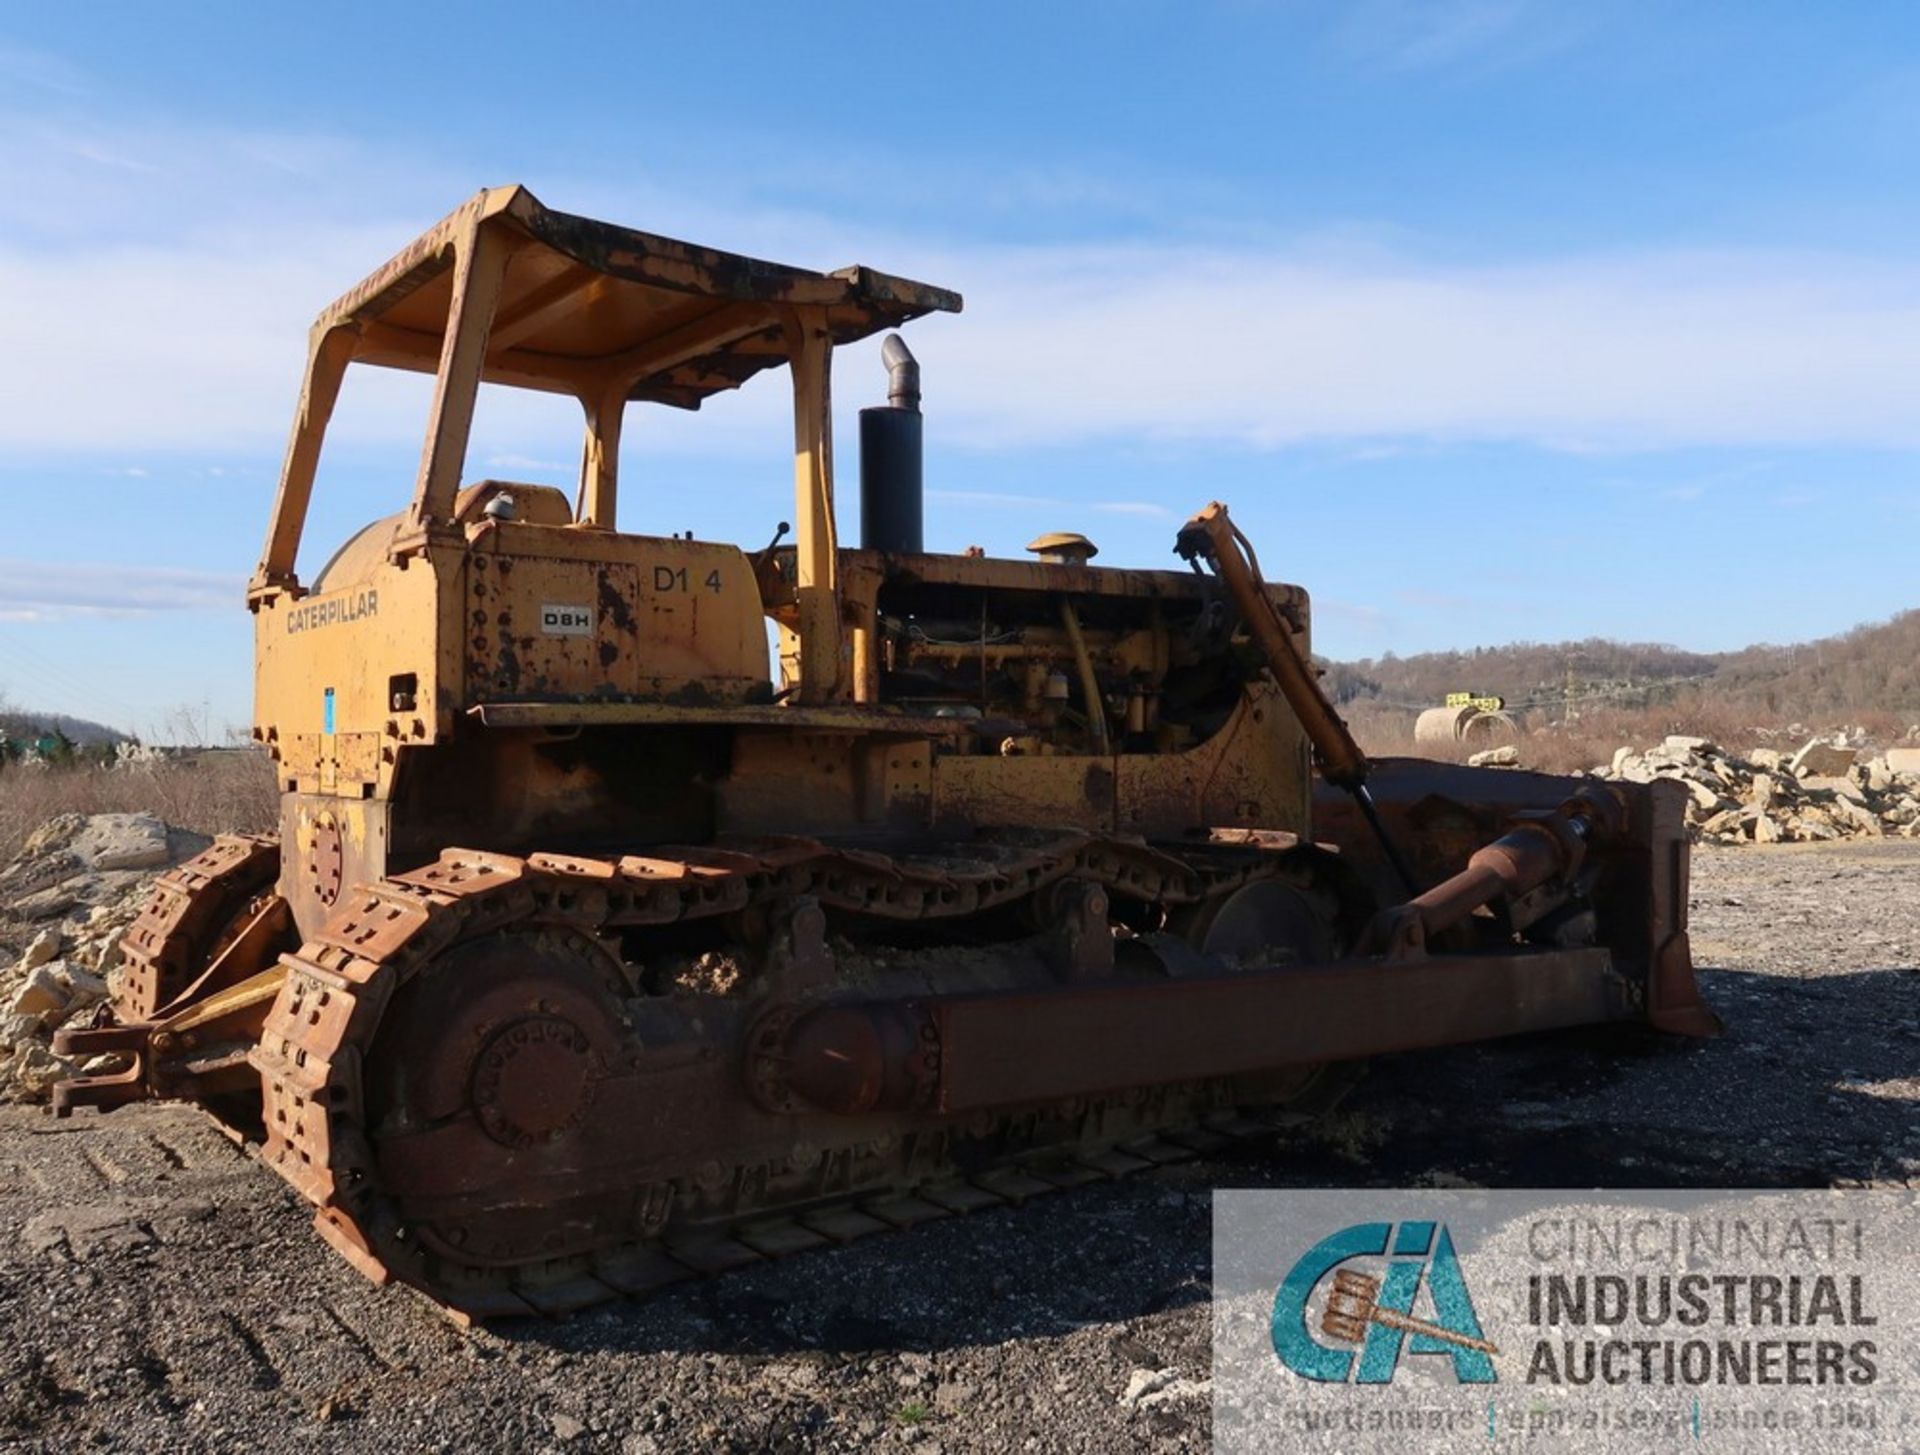 CATERPILLAR MODEL D8H CRAWLER DOZIER; S/N 46A28203 (NEW 1973), 53" X 148" BLADE, 24" TRACKS, HOURS - Image 3 of 18